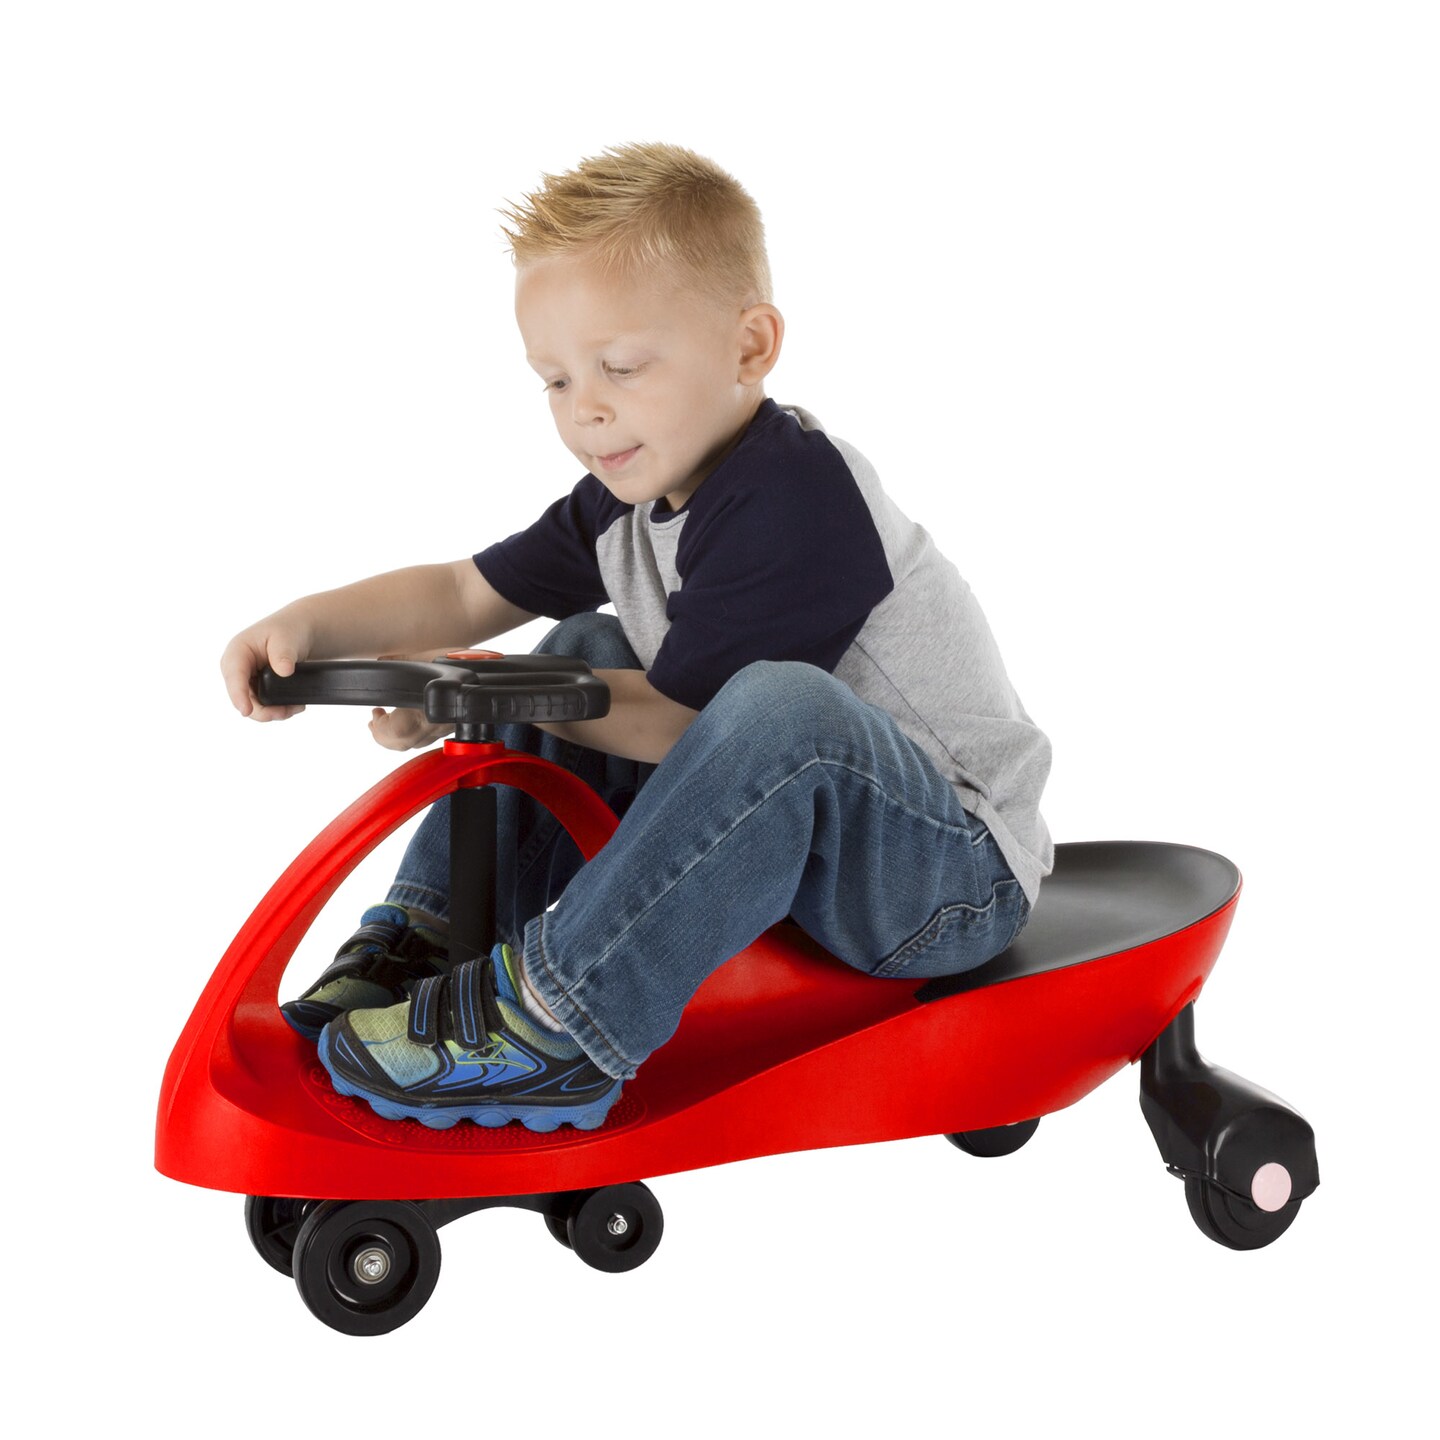 Lil Rider Ride on Toy ZigZag Twistcar Wiggle No Batteries No Gears No Pedals Easy Red Kids 2 - 6 Yrs